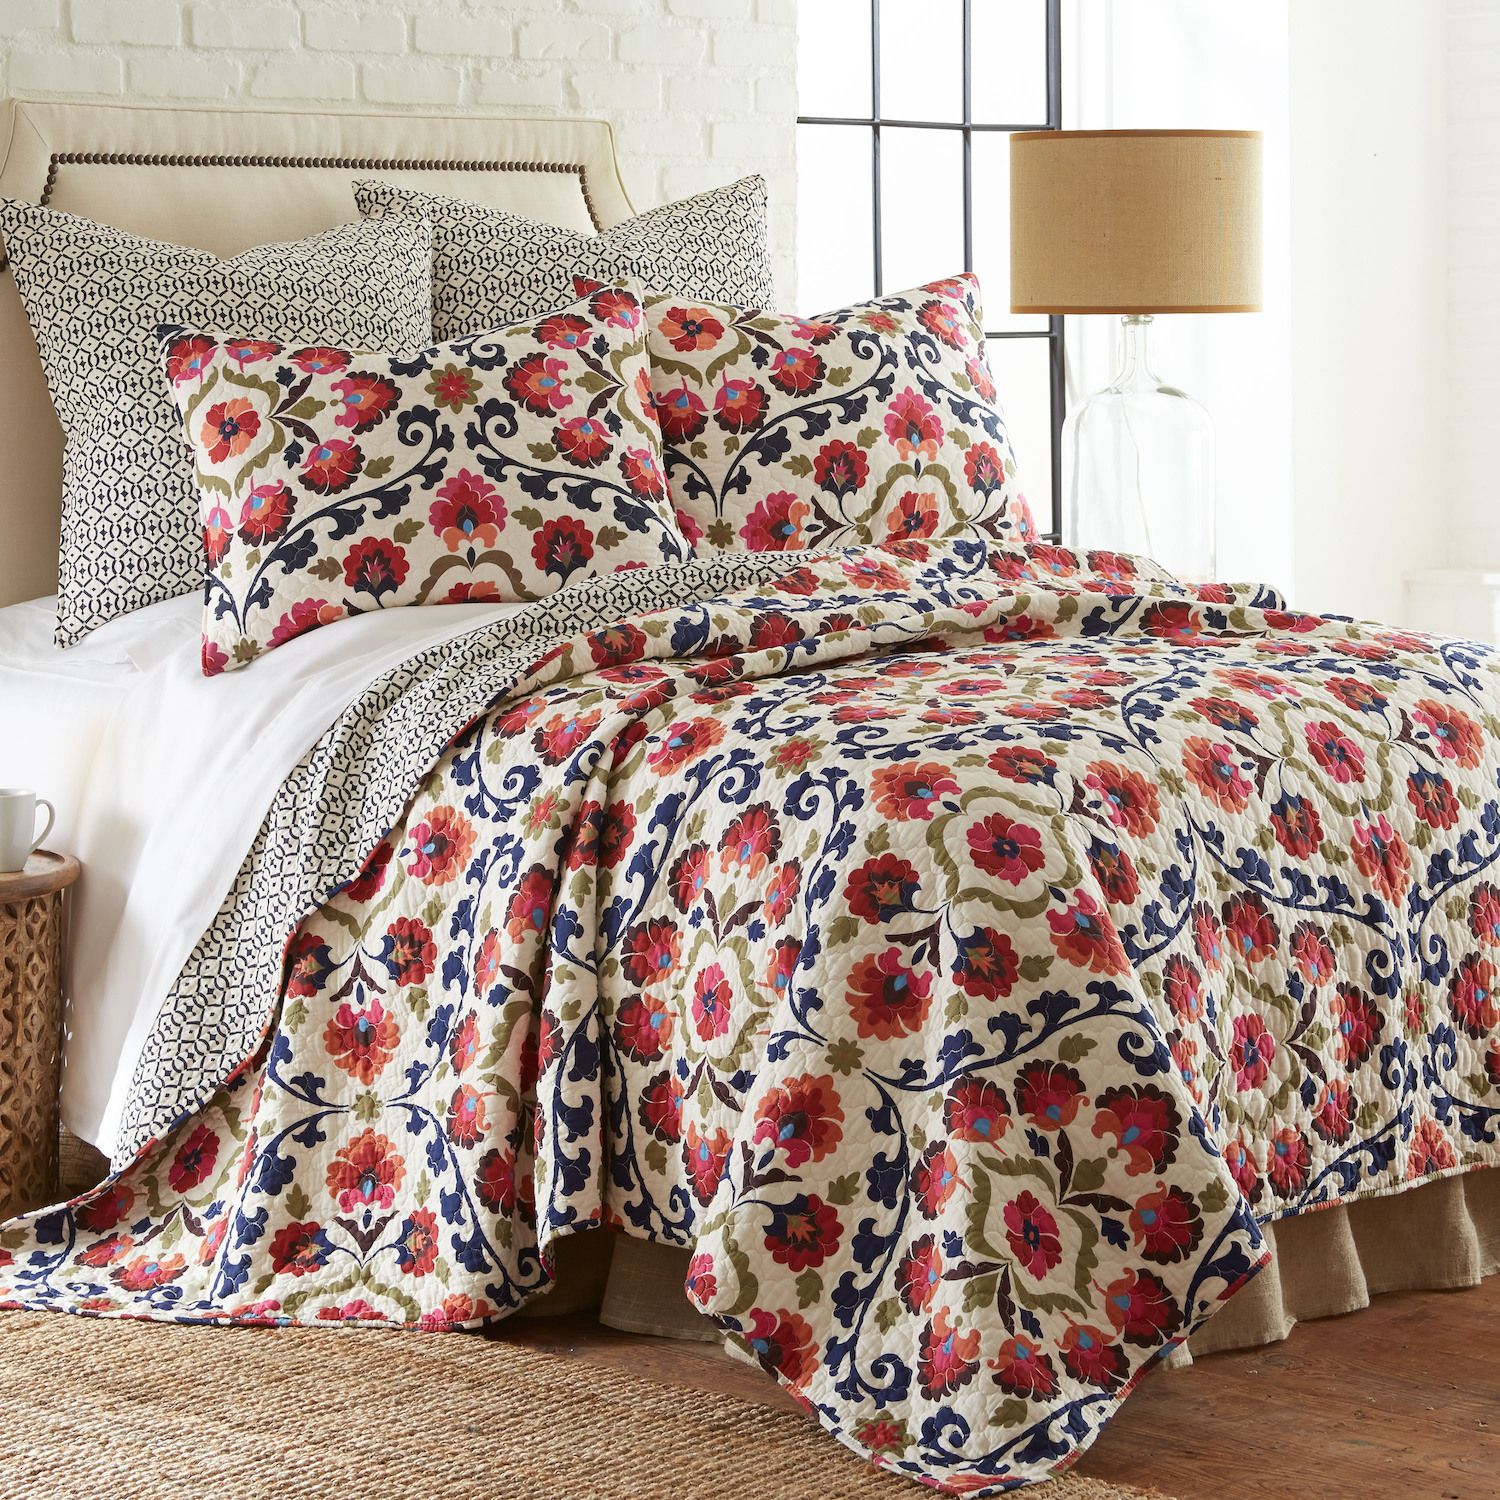 Image for Levtex Home Andrea Quilt Set at Kohl's.